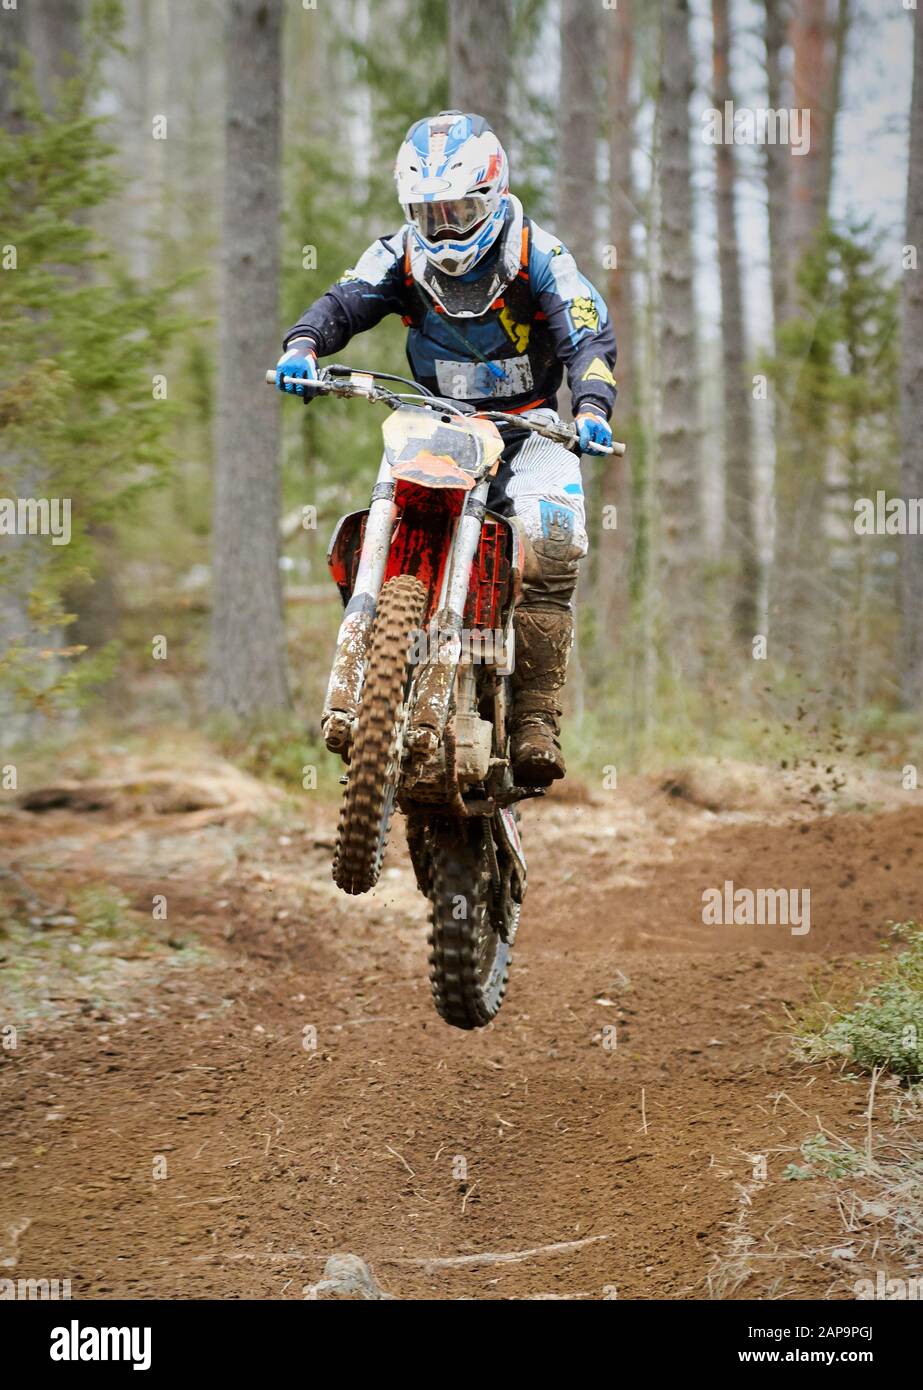 Motocross driver jumping with the bike at high speed on the race track. Stock Photo